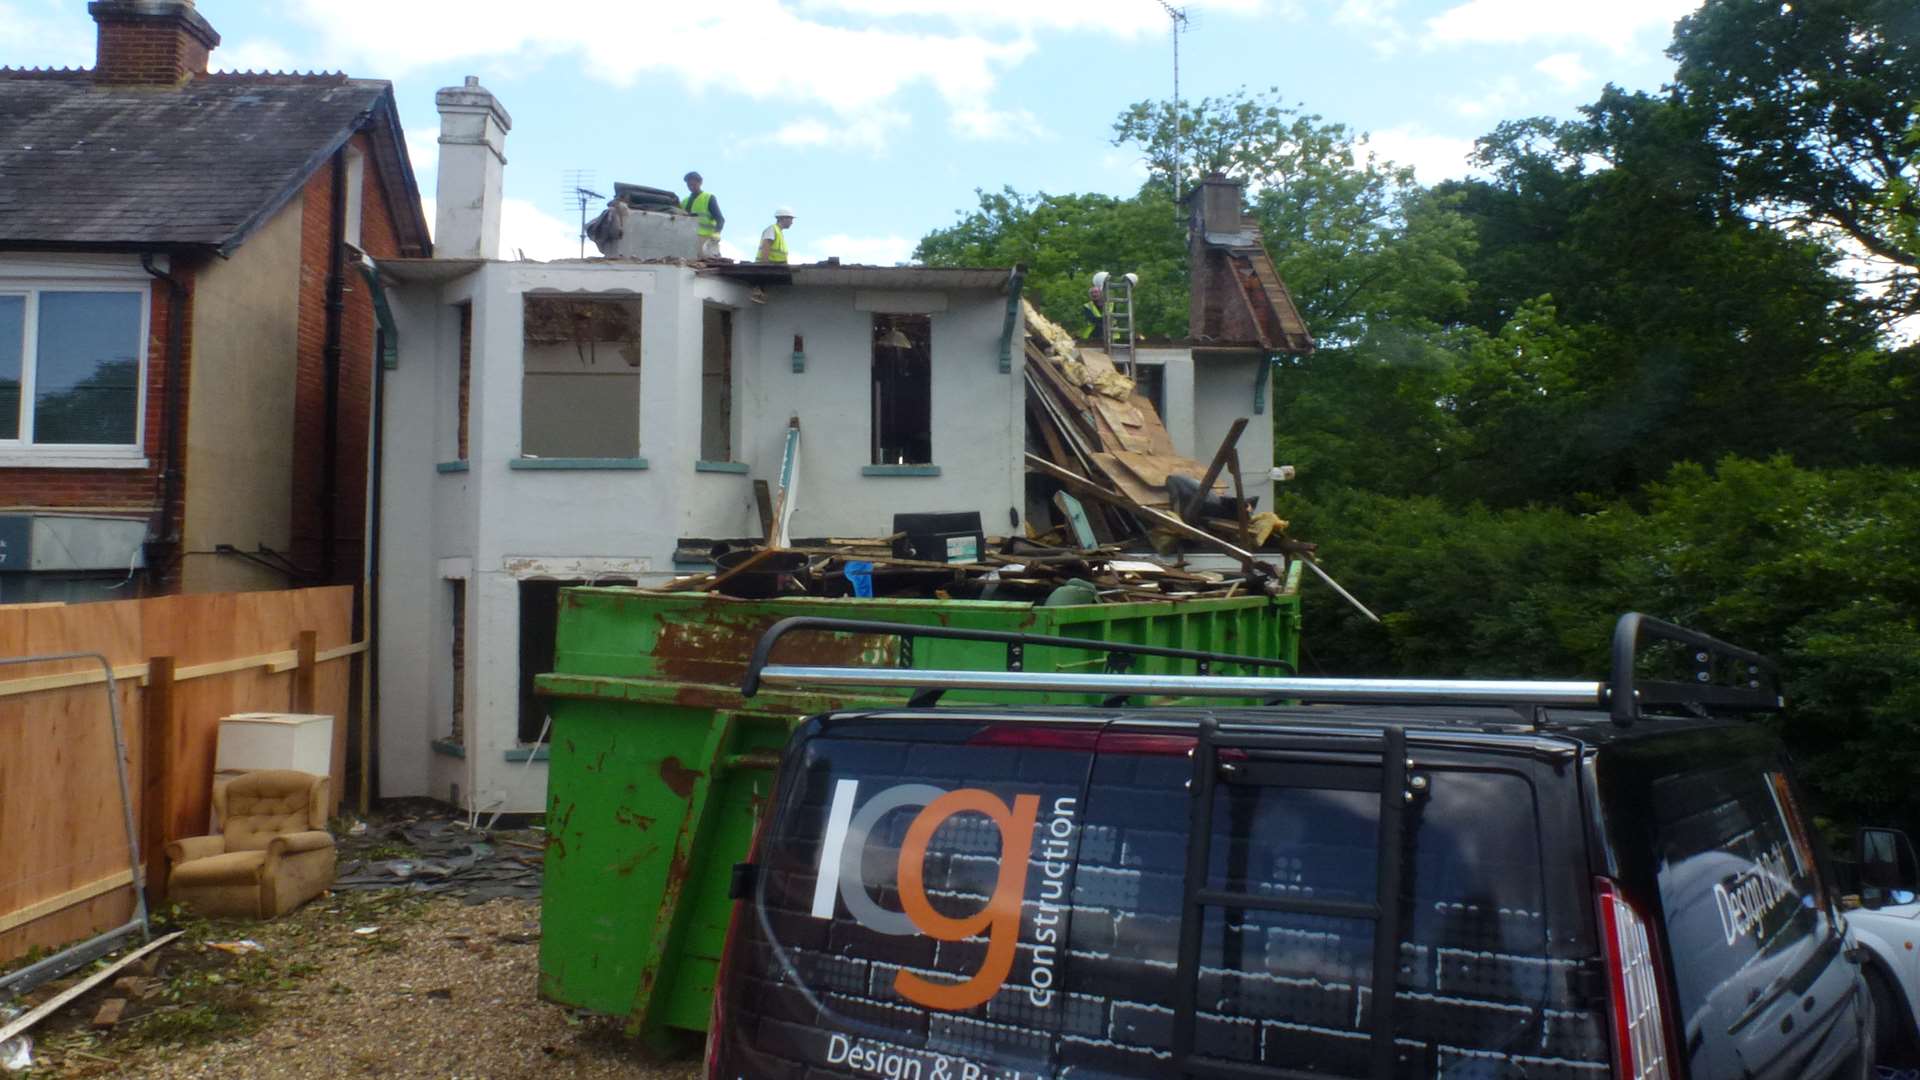 The demolition site in Surrey where numerous health and safety breaches were recorded